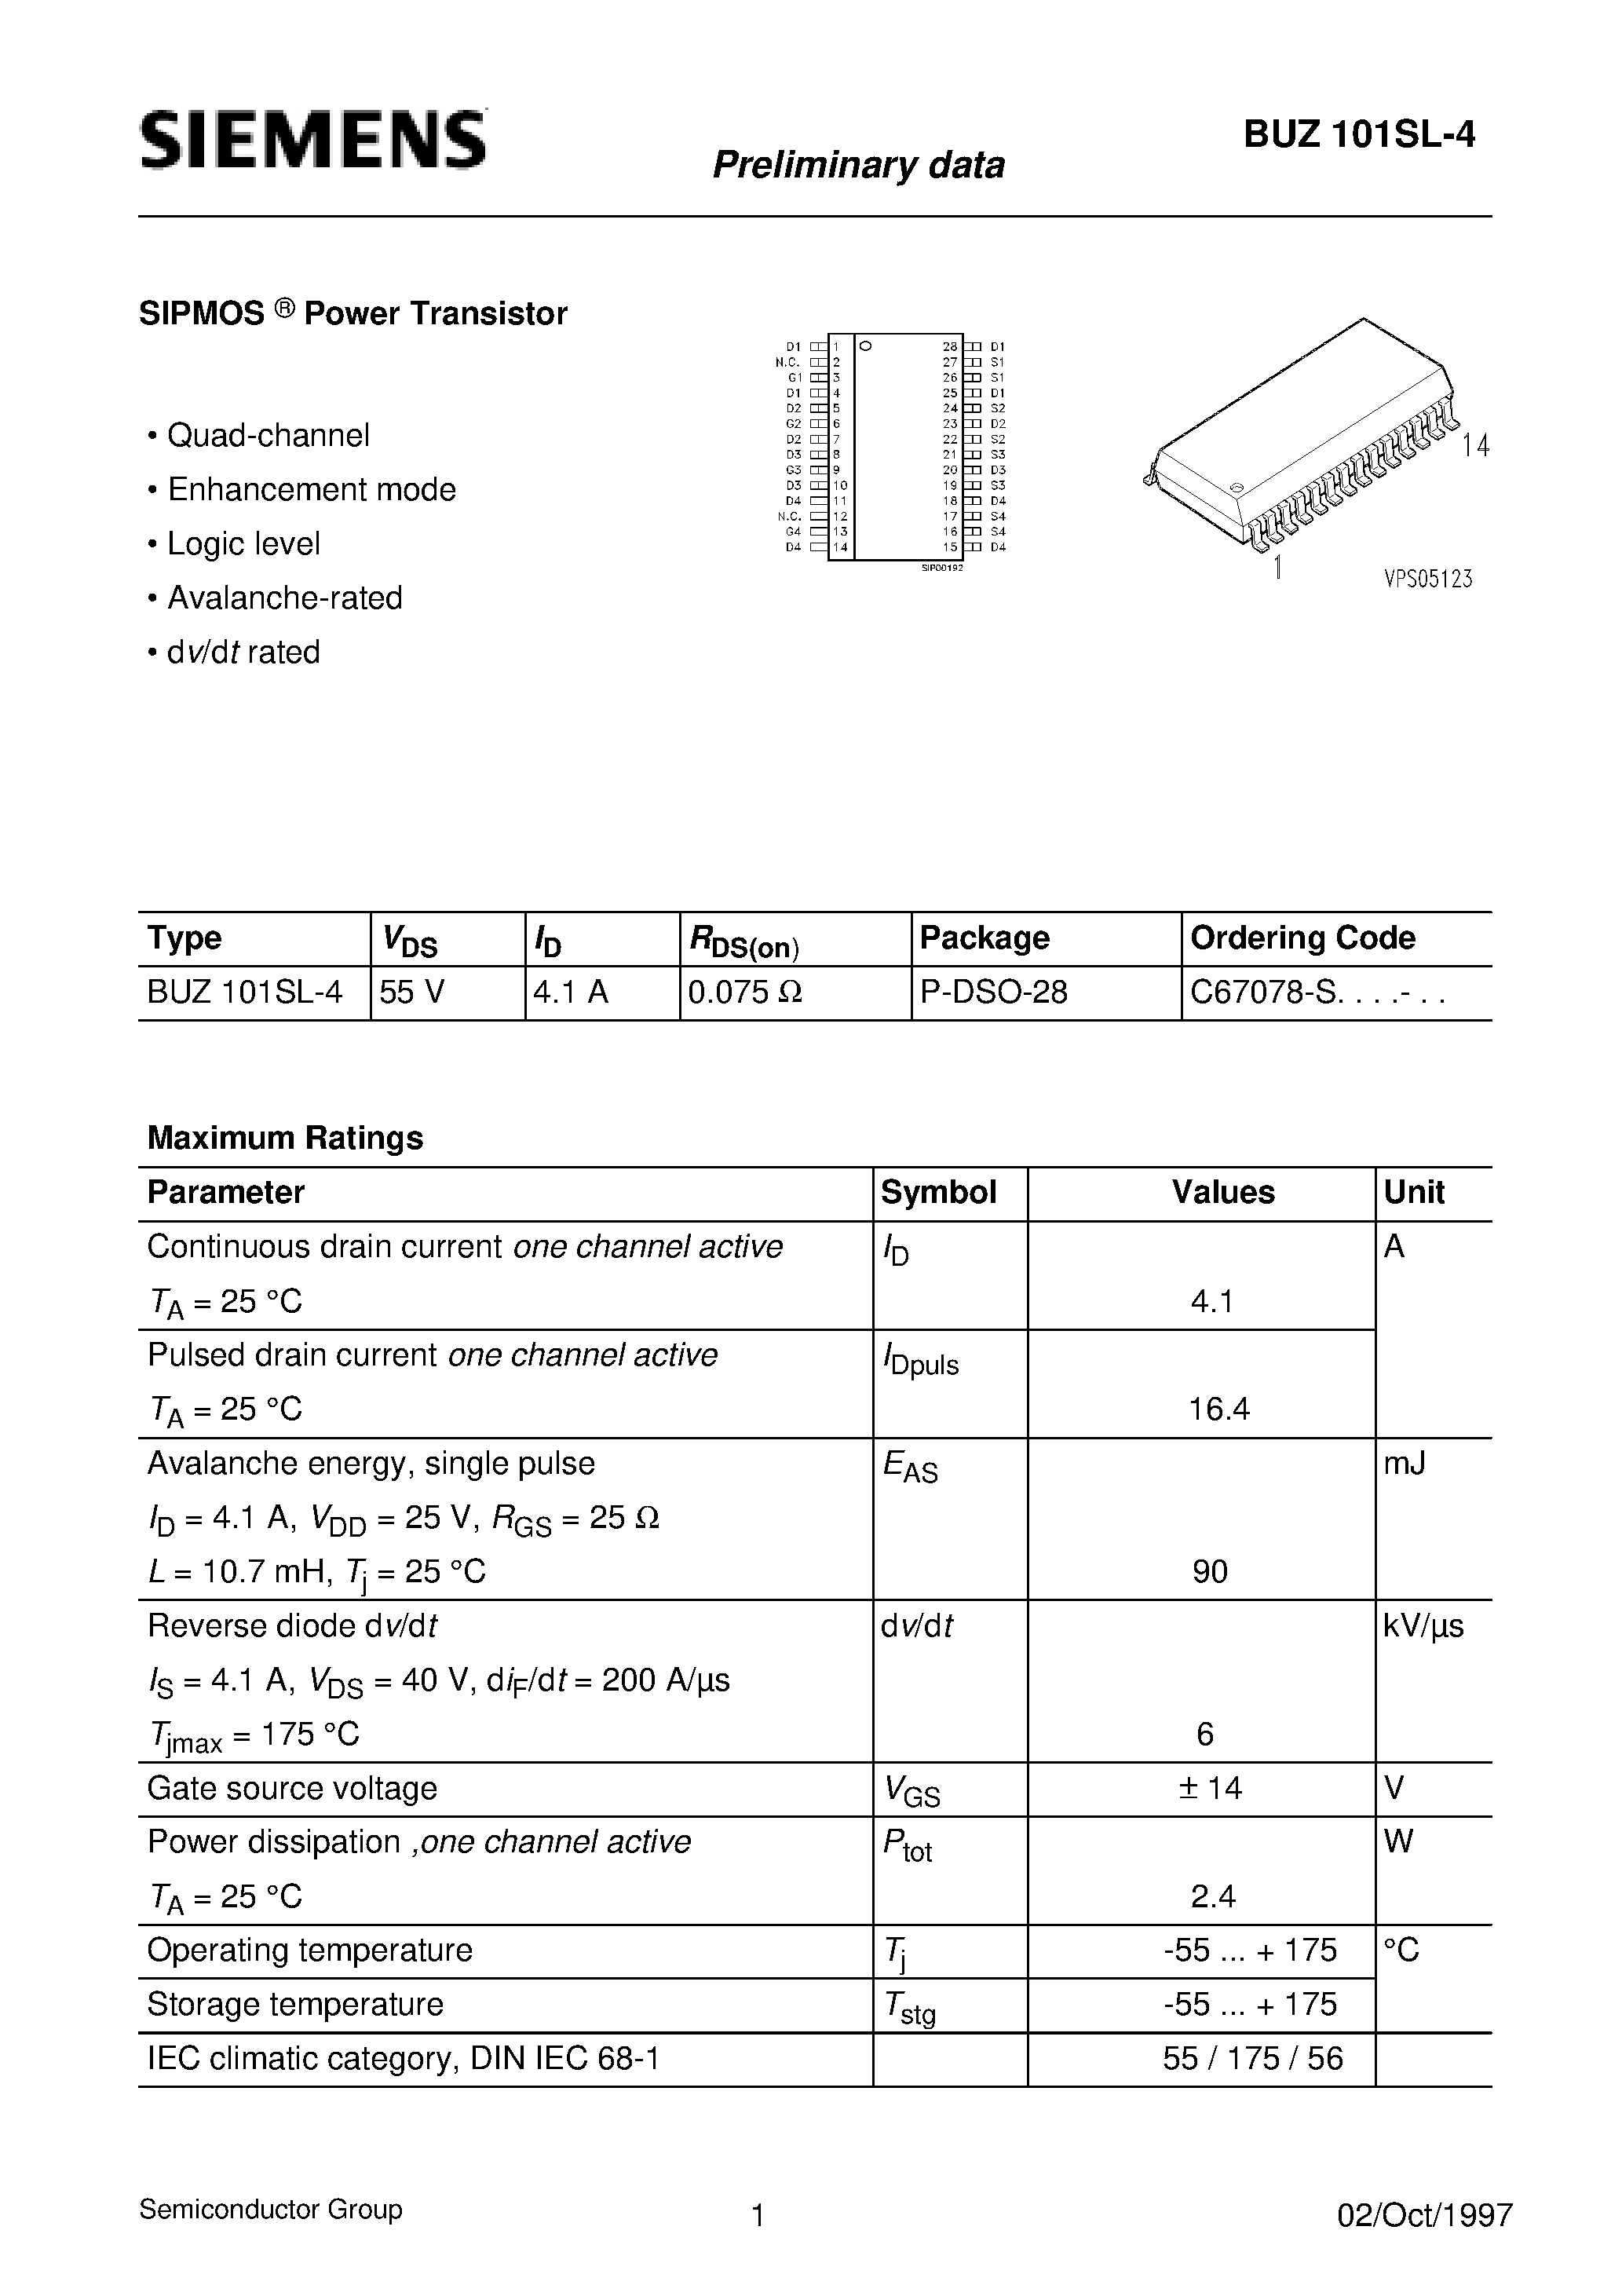 Datasheet BUZ101SL-4 - SIPMOS Power Transistor (Quad-channel Enhancement mode Logic level Avalanche-rated d v/d t rated) page 1